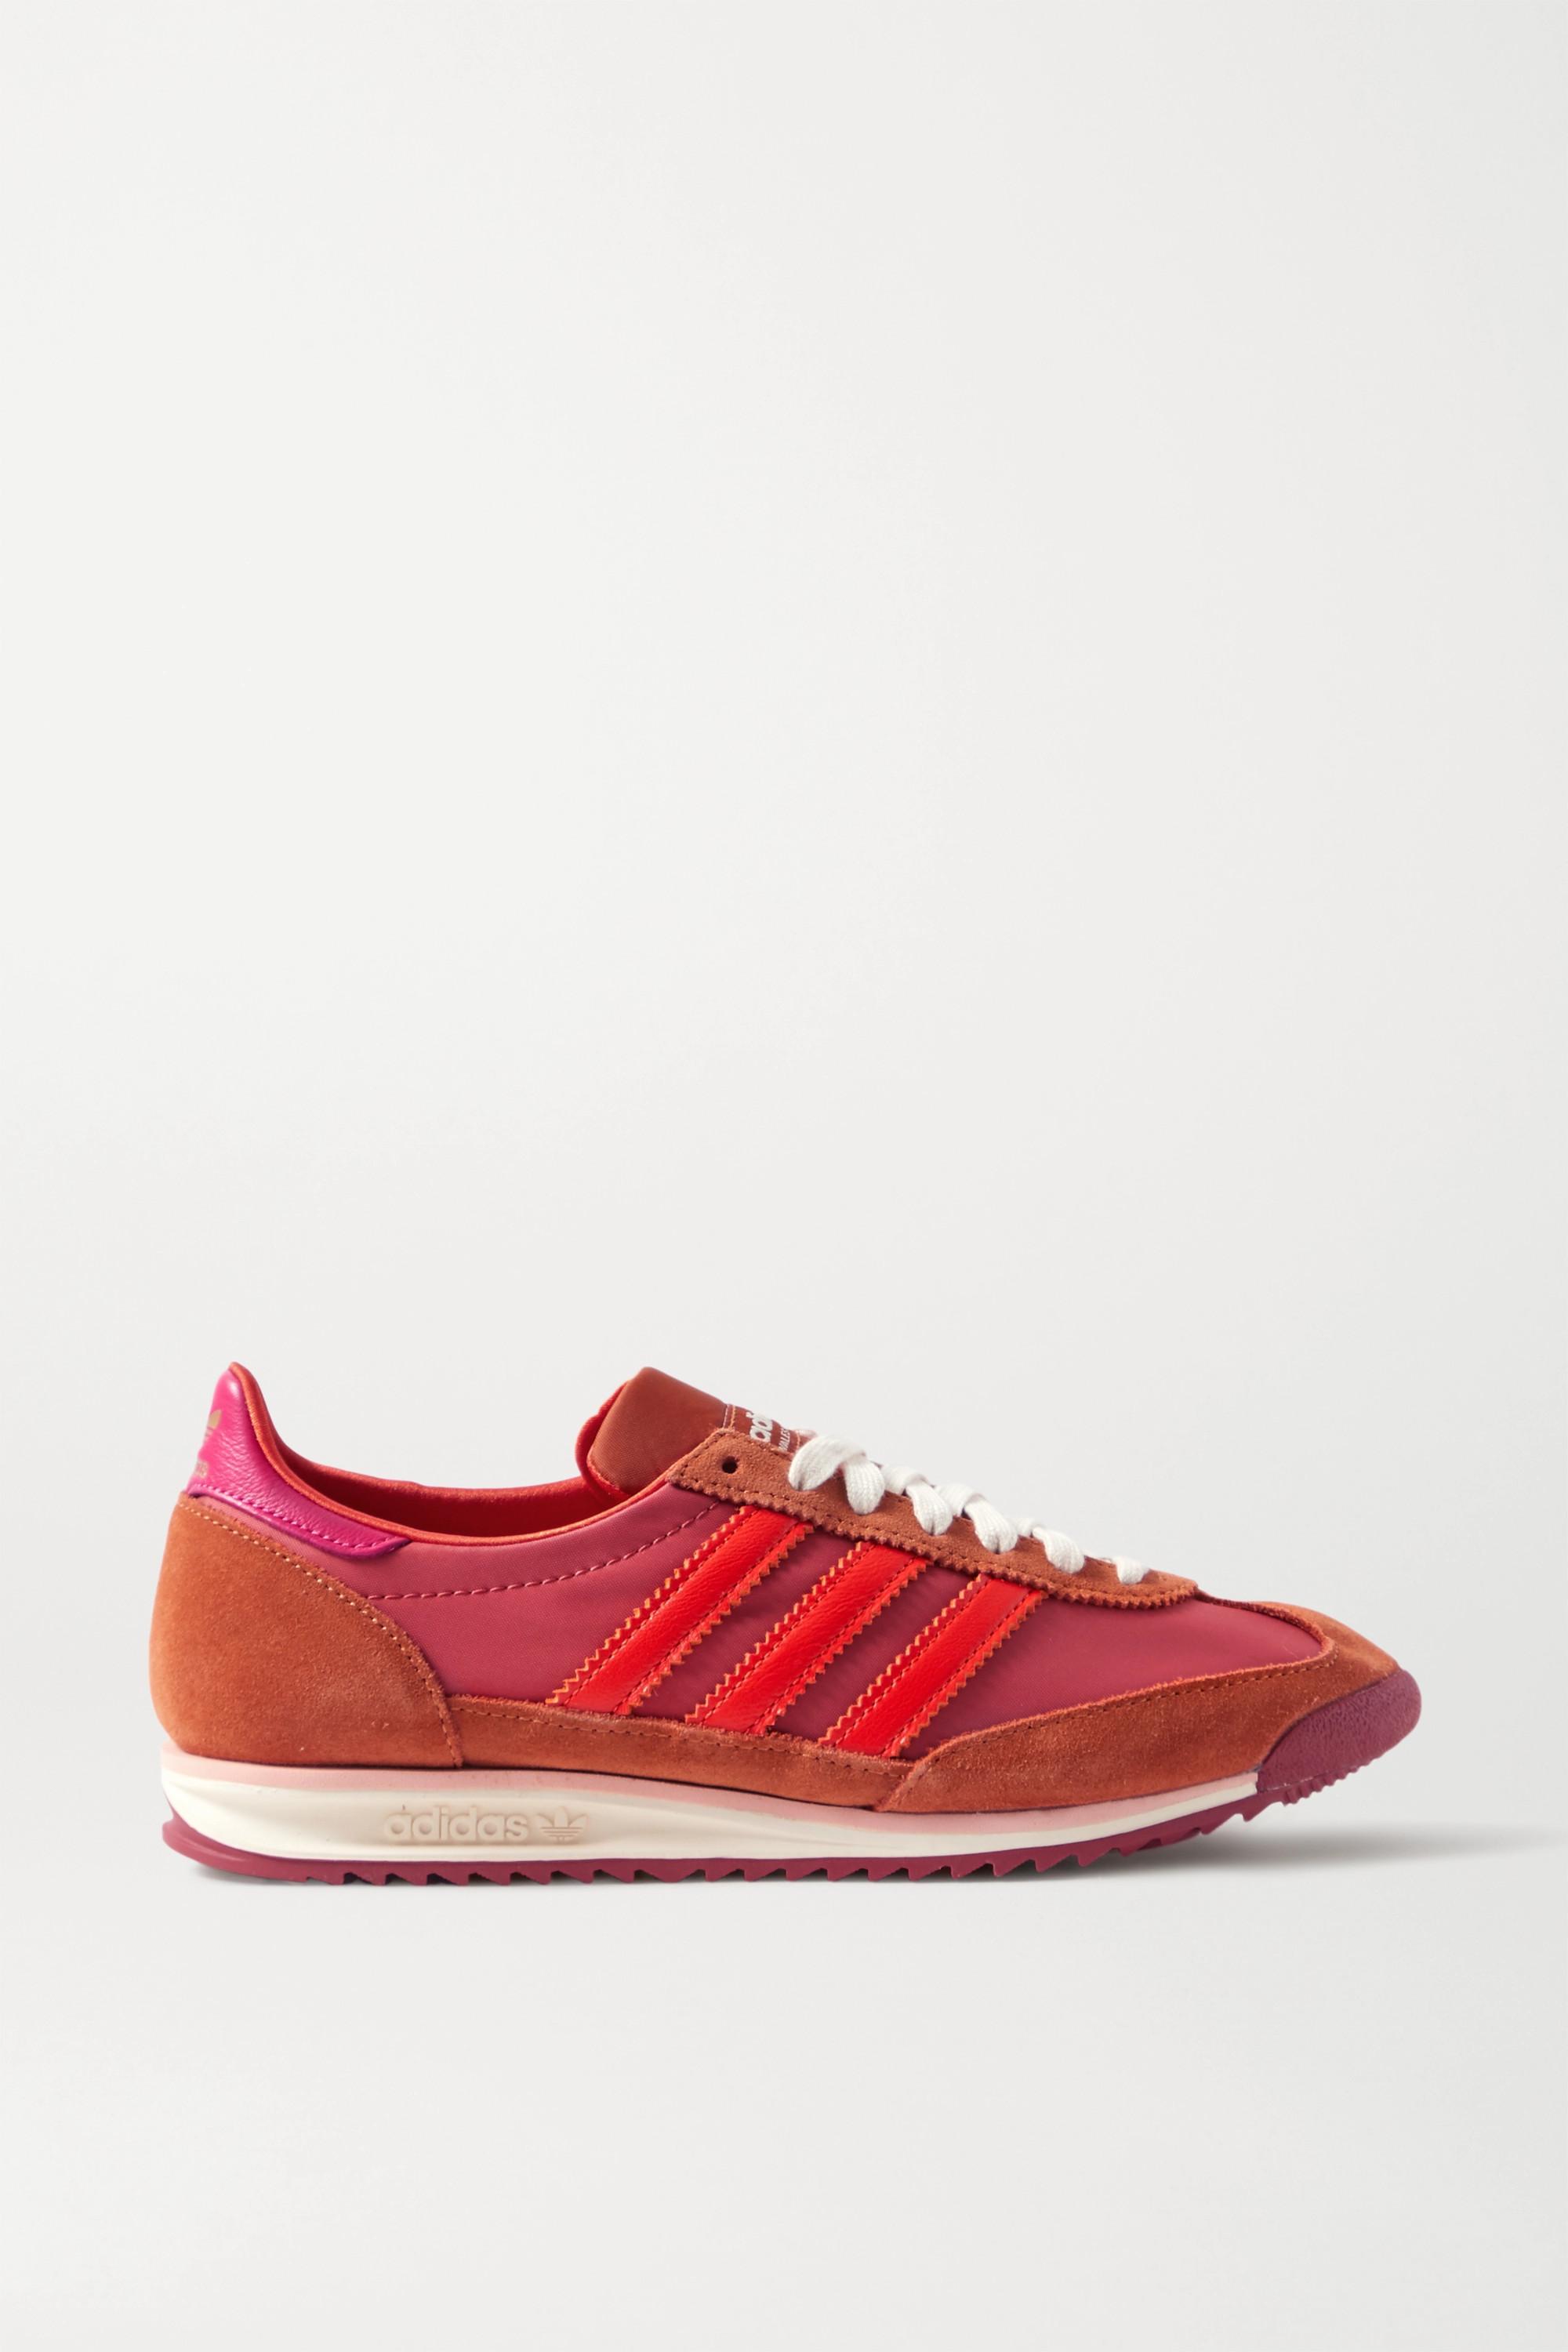 adidas Originals + Wales Bonner Sl 72 Shell, Leather And Suede 